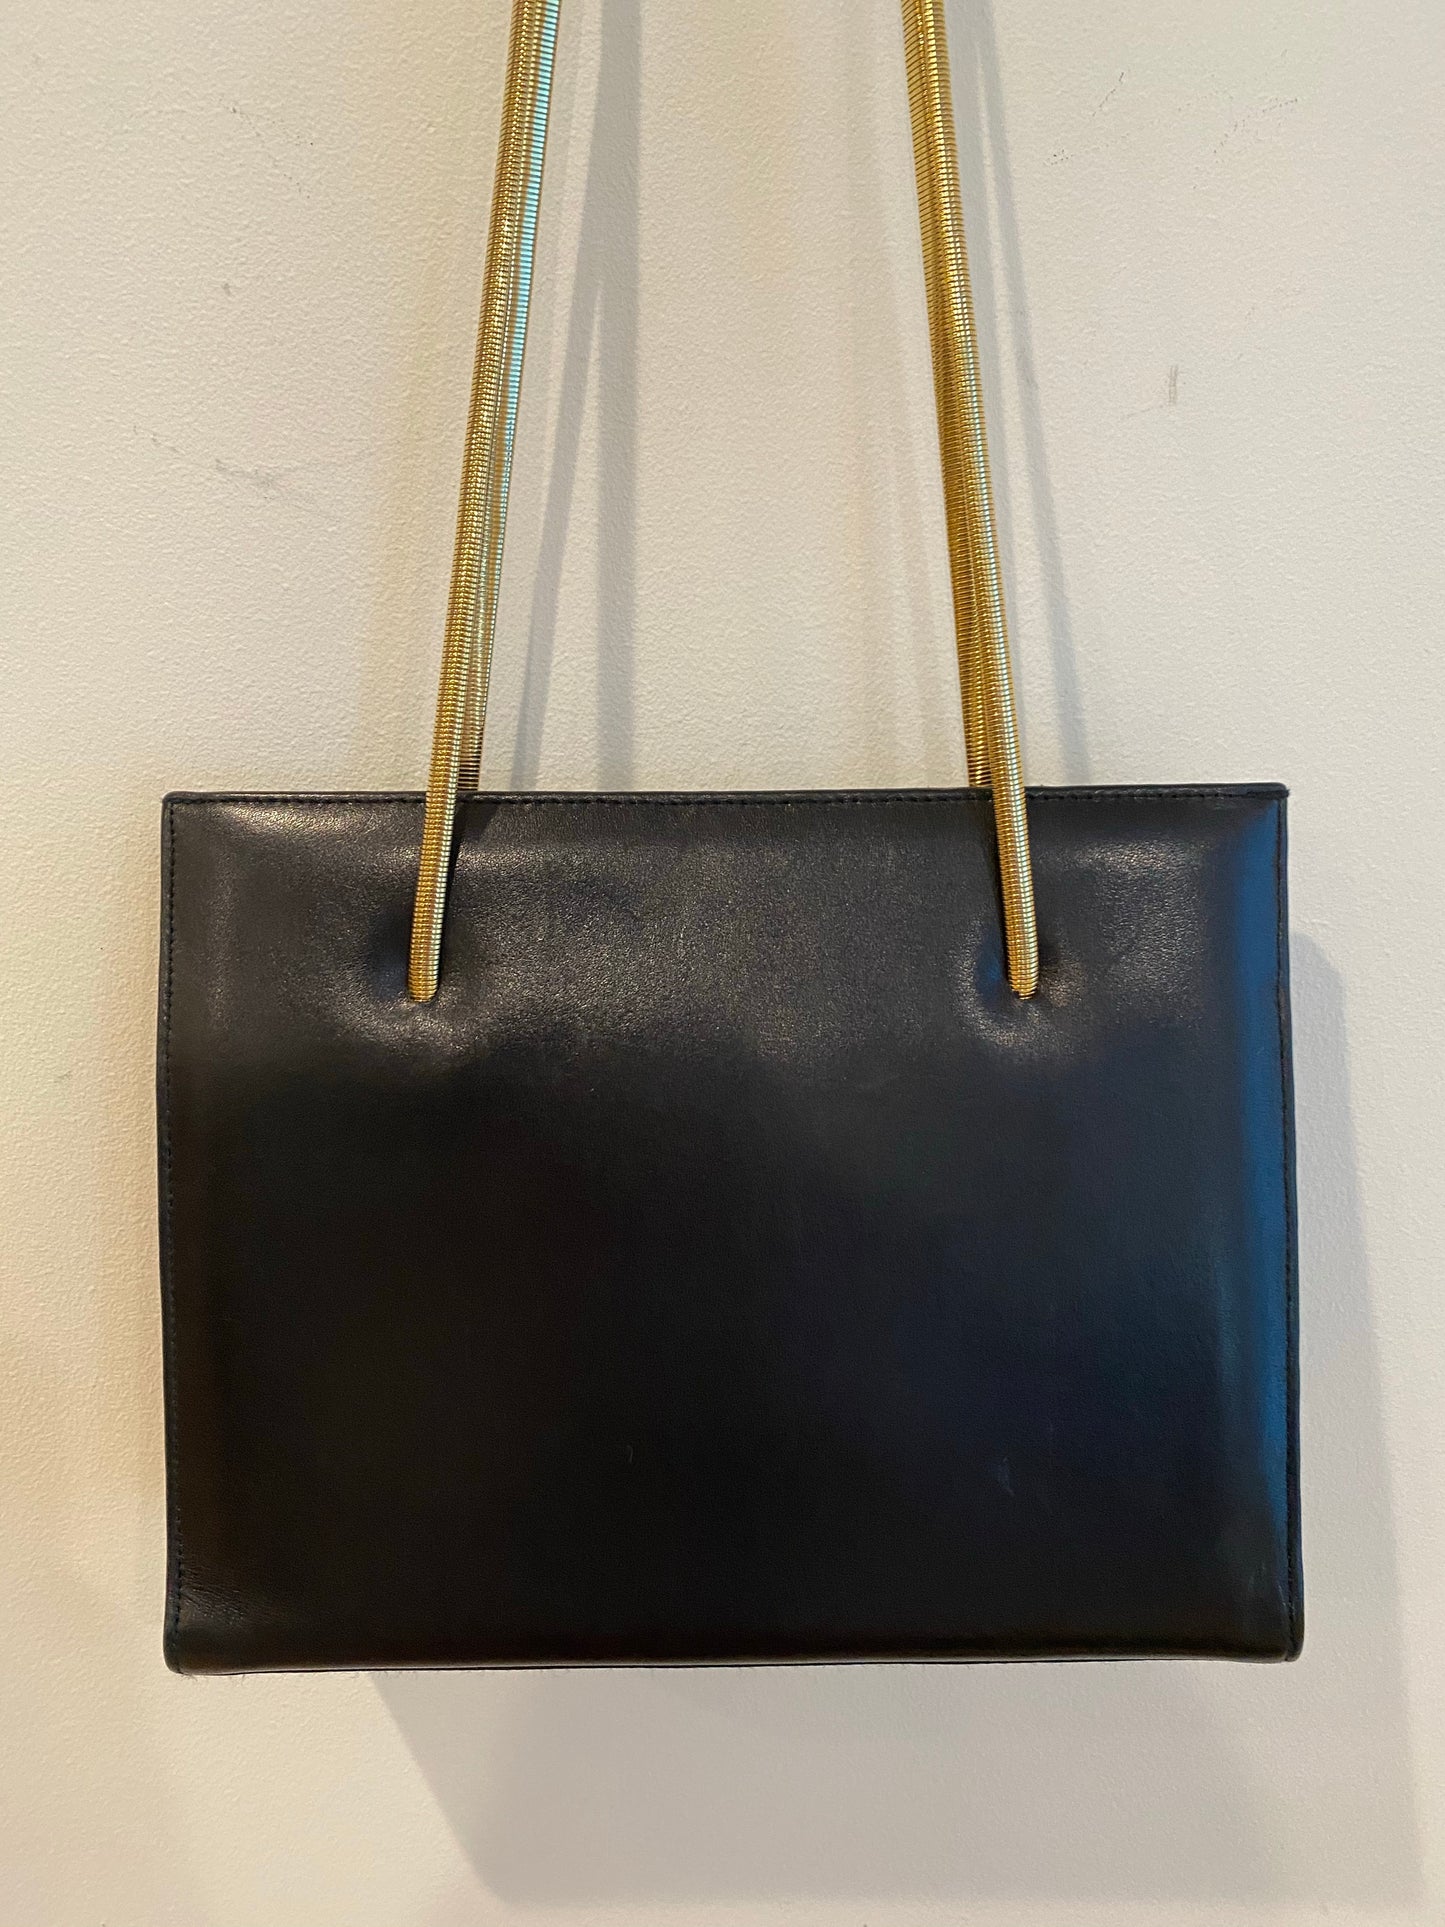 Black Leather Handbag with Gold Snakechain